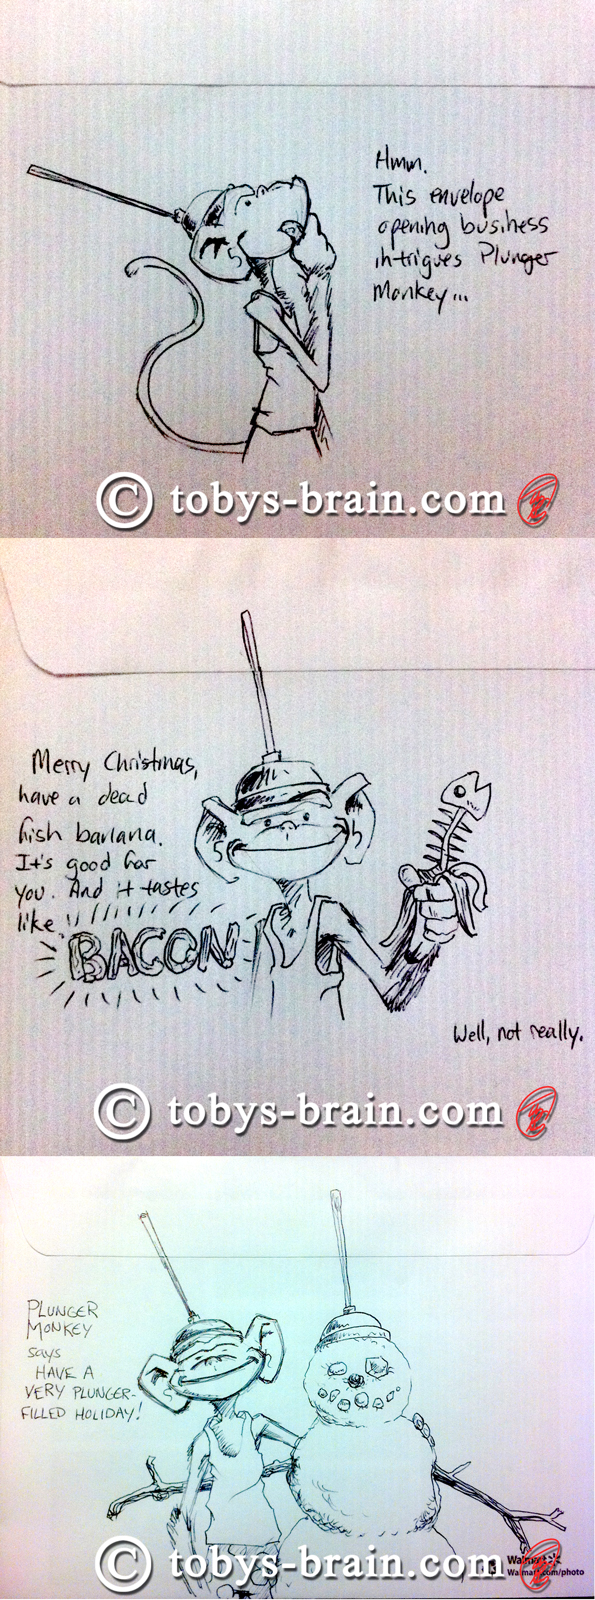 Plunger Monkey themed xmas card envelopes I draw for friends and family annually.